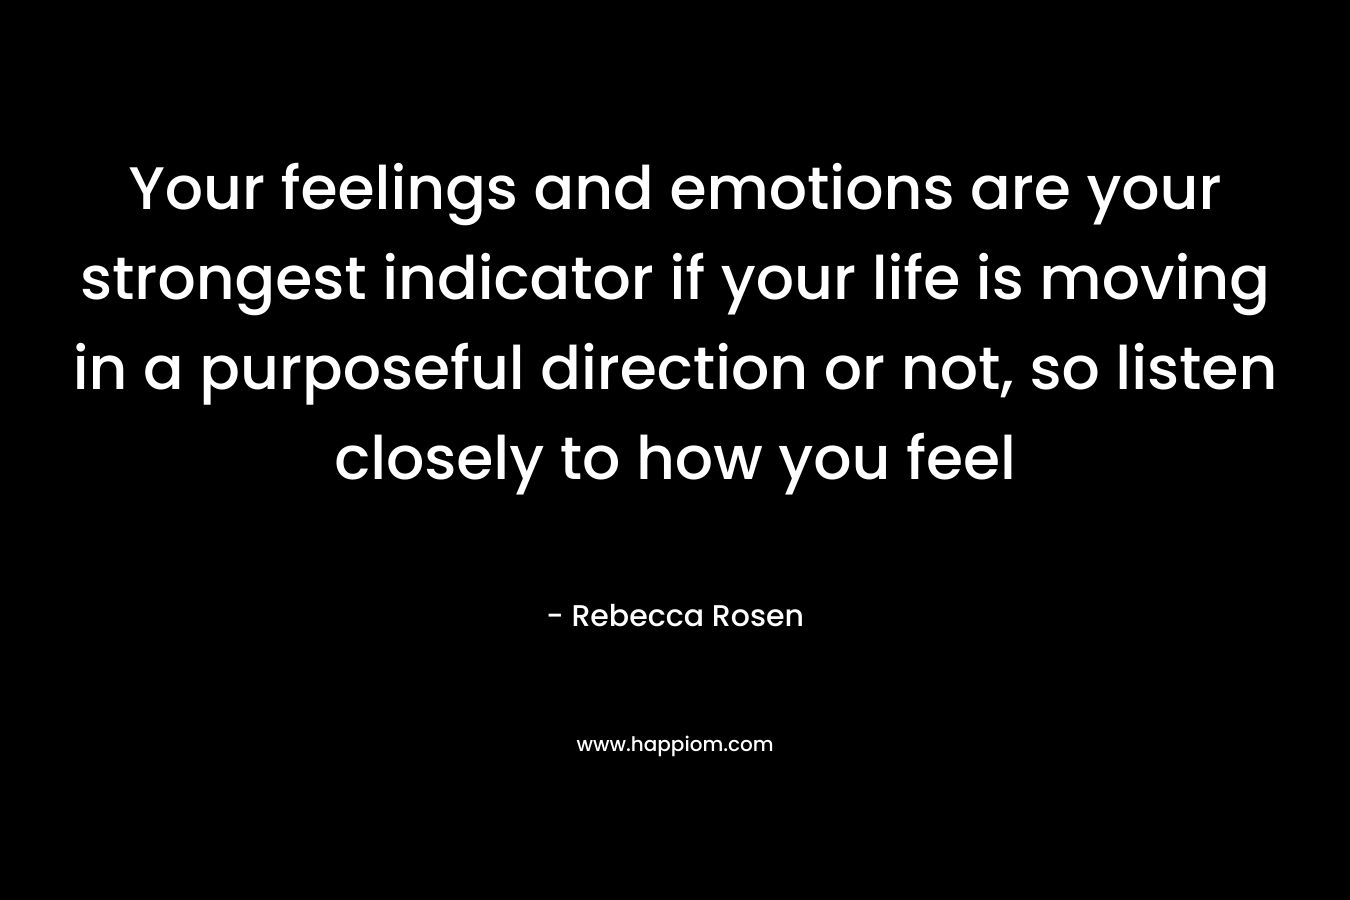 Your feelings and emotions are your strongest indicator if your life is moving in a purposeful direction or not, so listen closely to how you feel – Rebecca Rosen